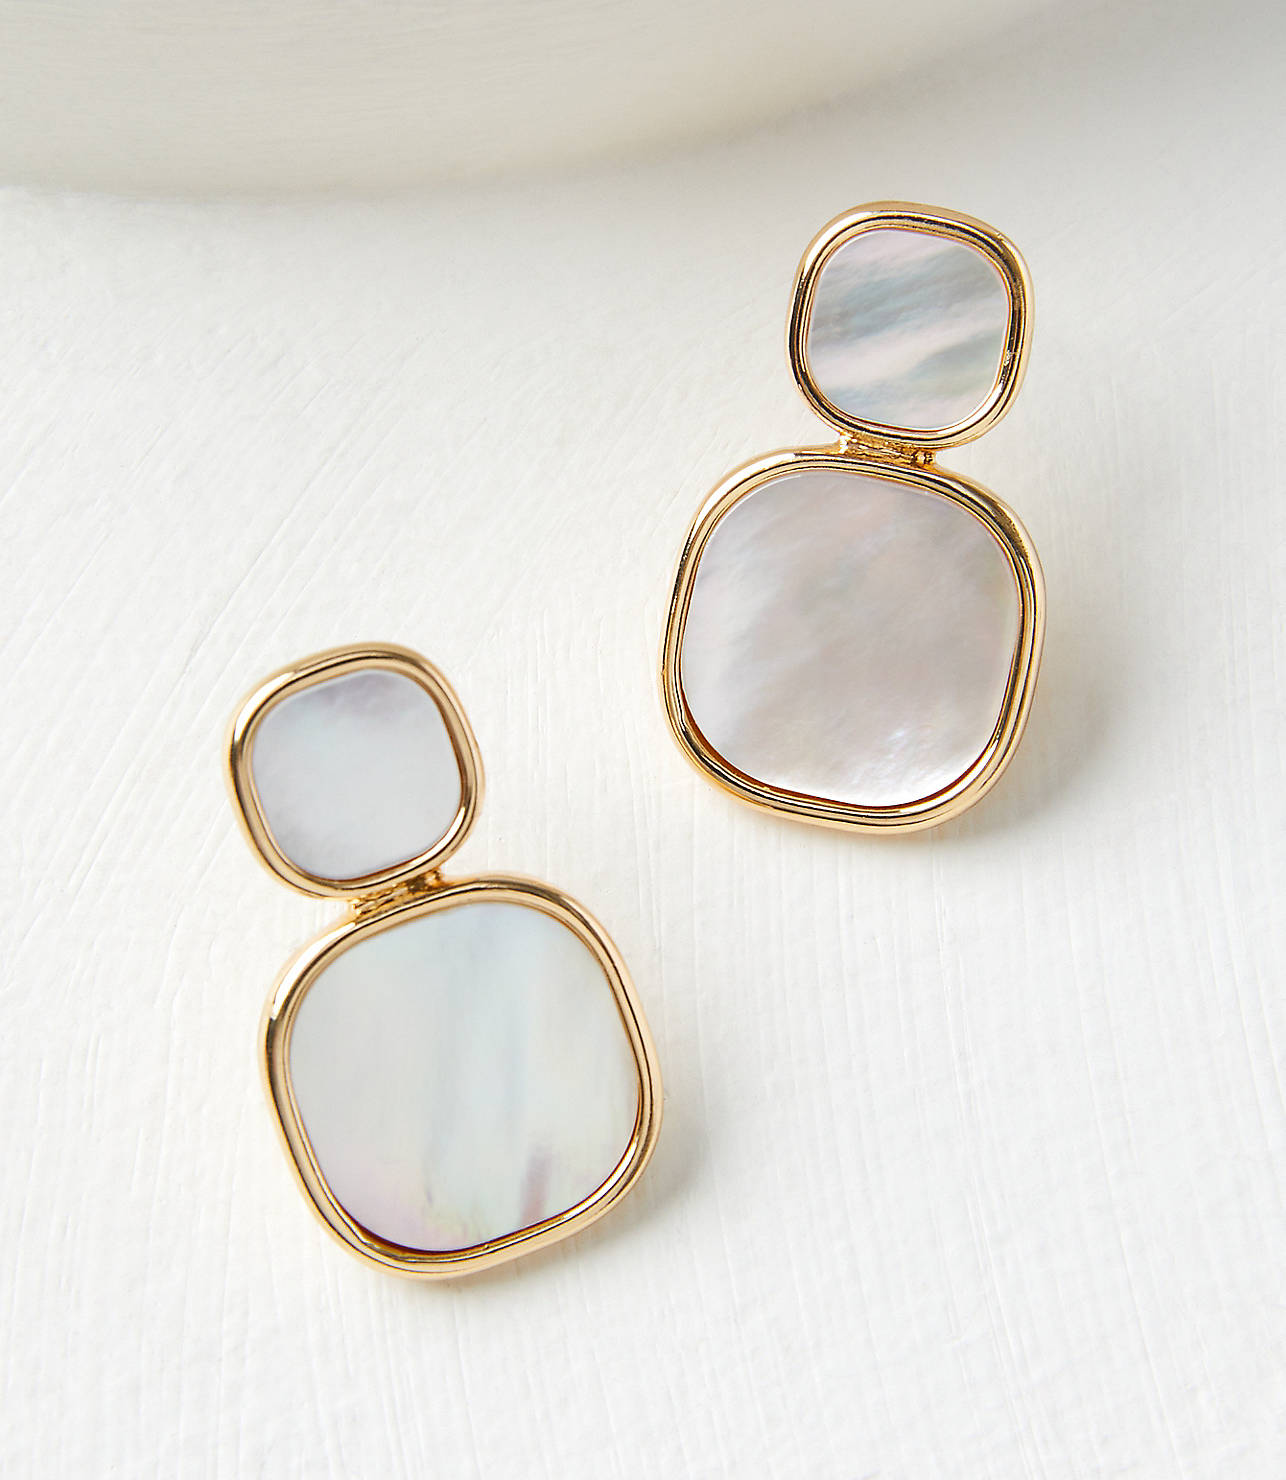 Rounded Square Drop Earrings